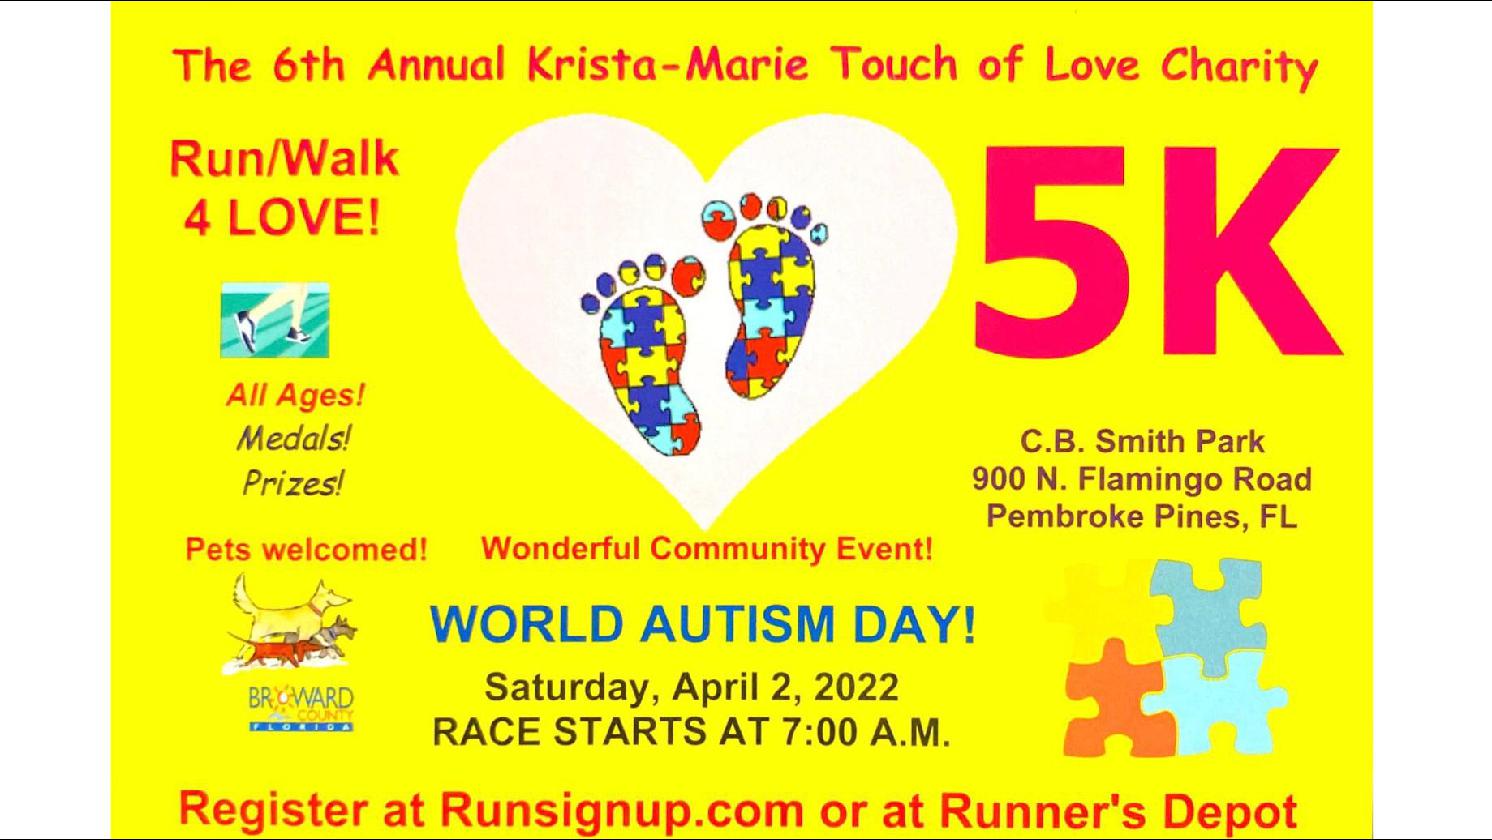 The 6th Annual Krista-Marie Touch of Love Charity 5K